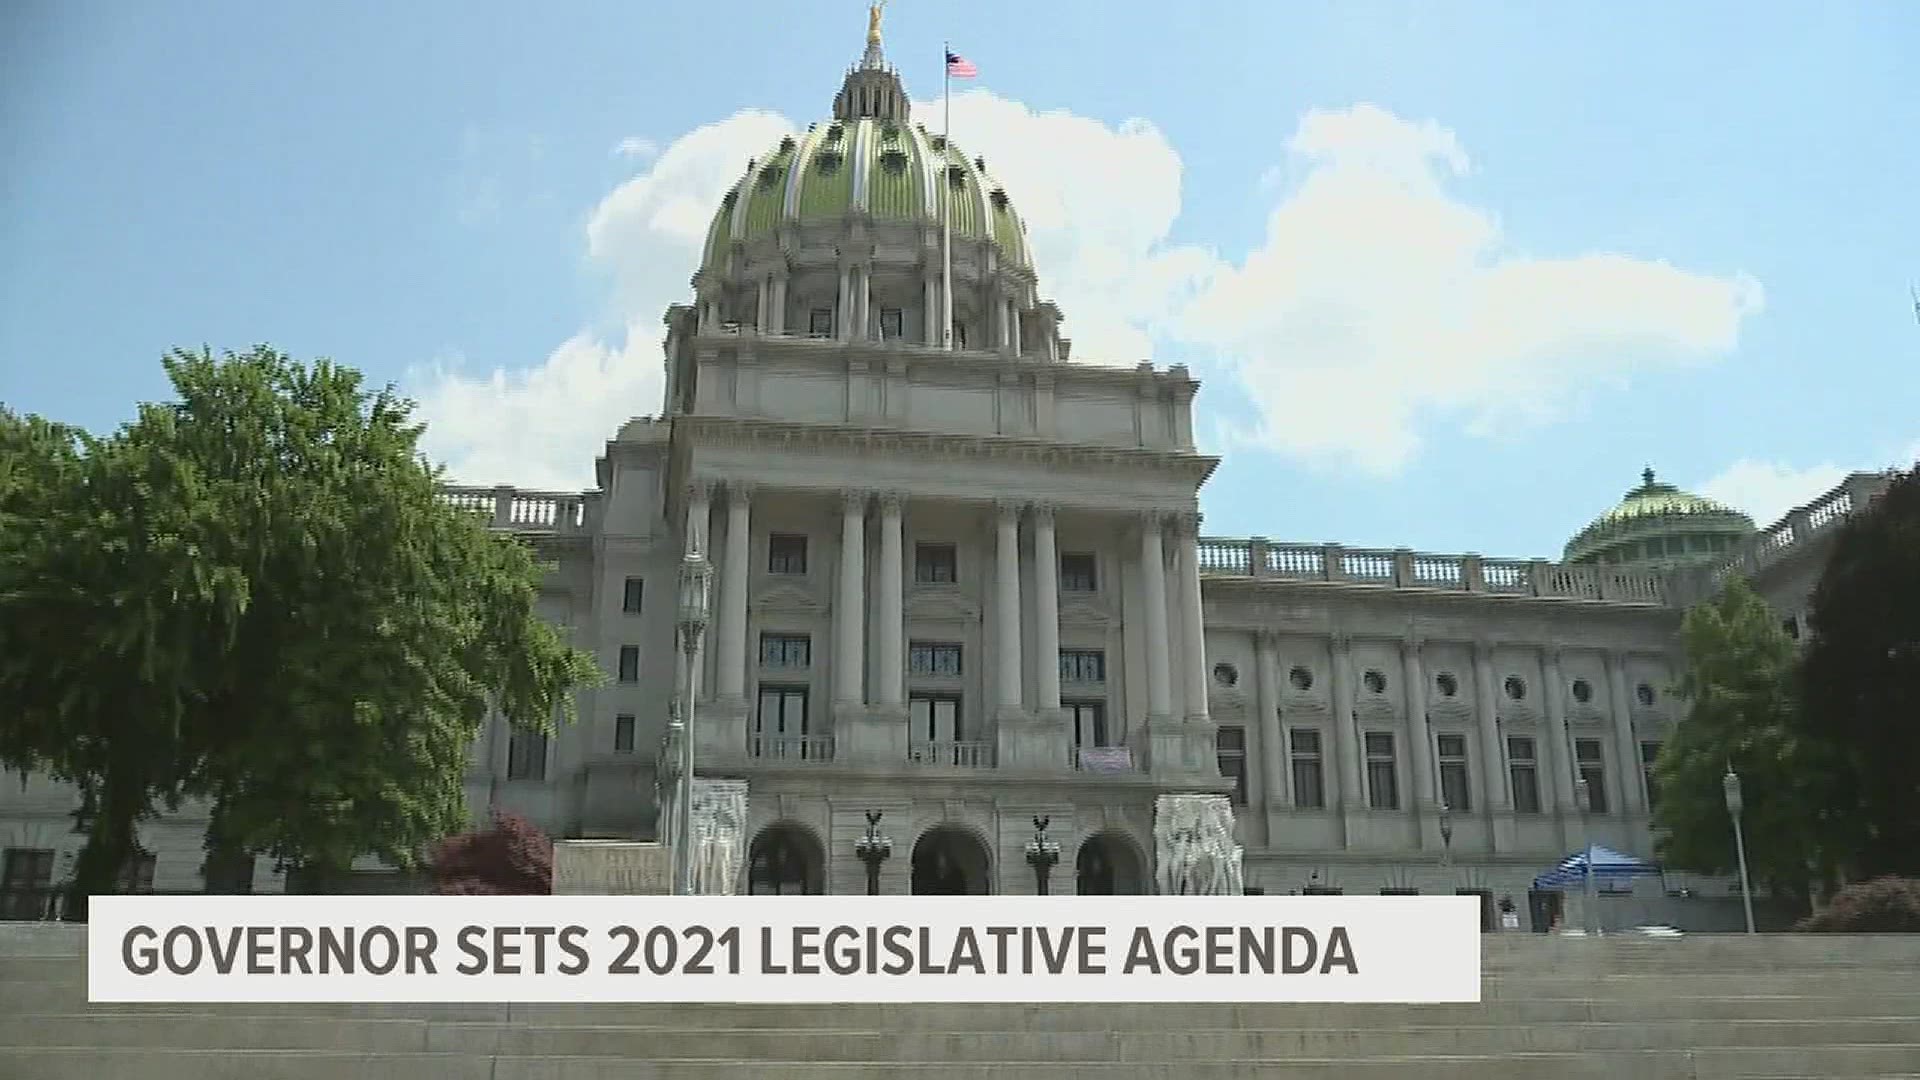 On the first day of the Pennsylvania General Assembly’s new legislative session, Gov. Tom Wolf unveiled his legislative priorities for the coming year.